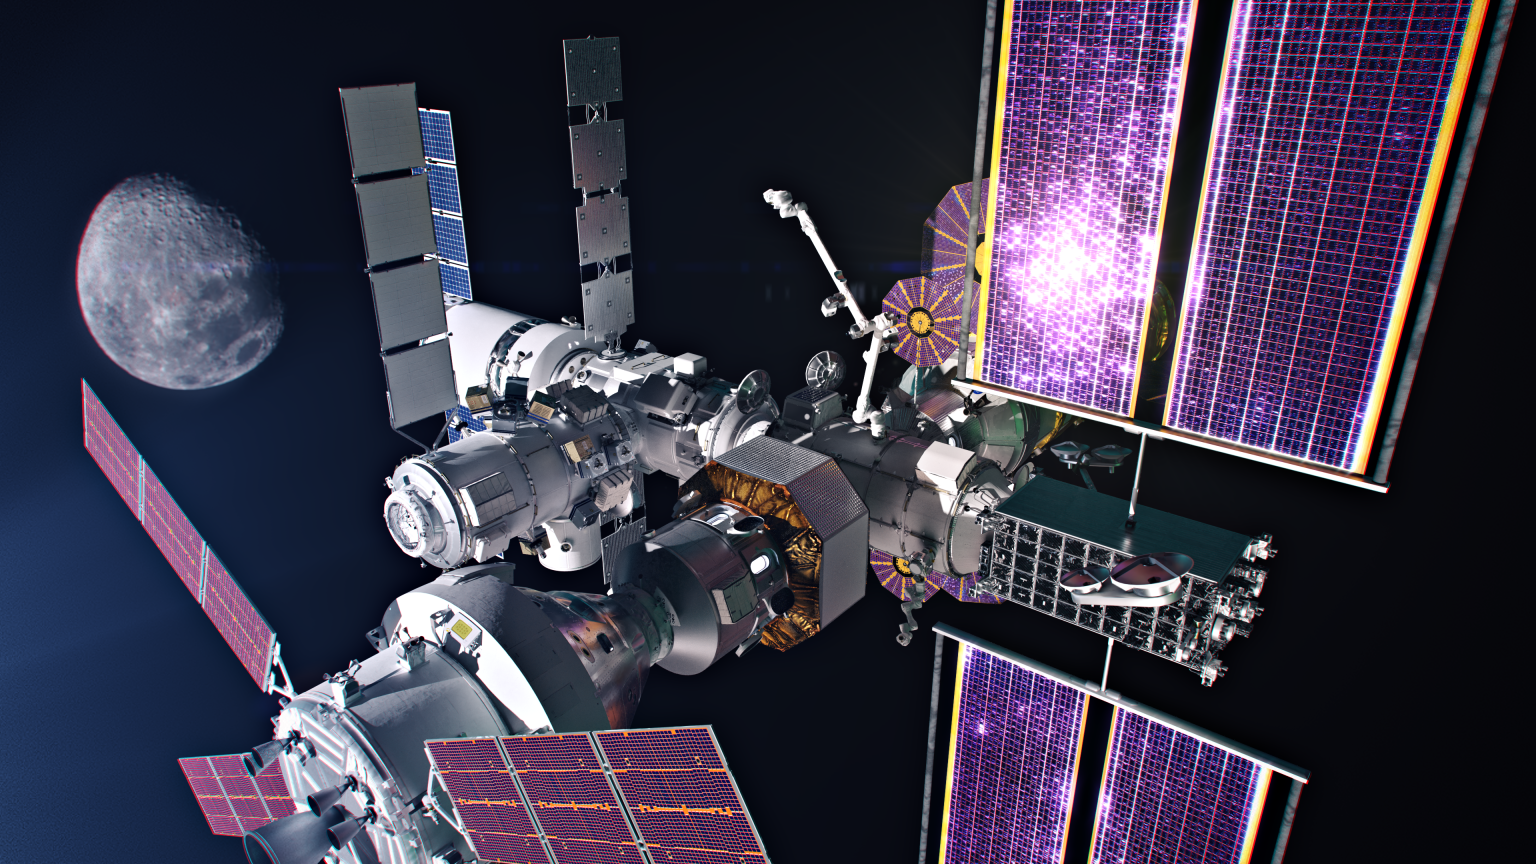 A grey space vehicle consisting of several attached sections; purple solar panels protrude from several of the sections.